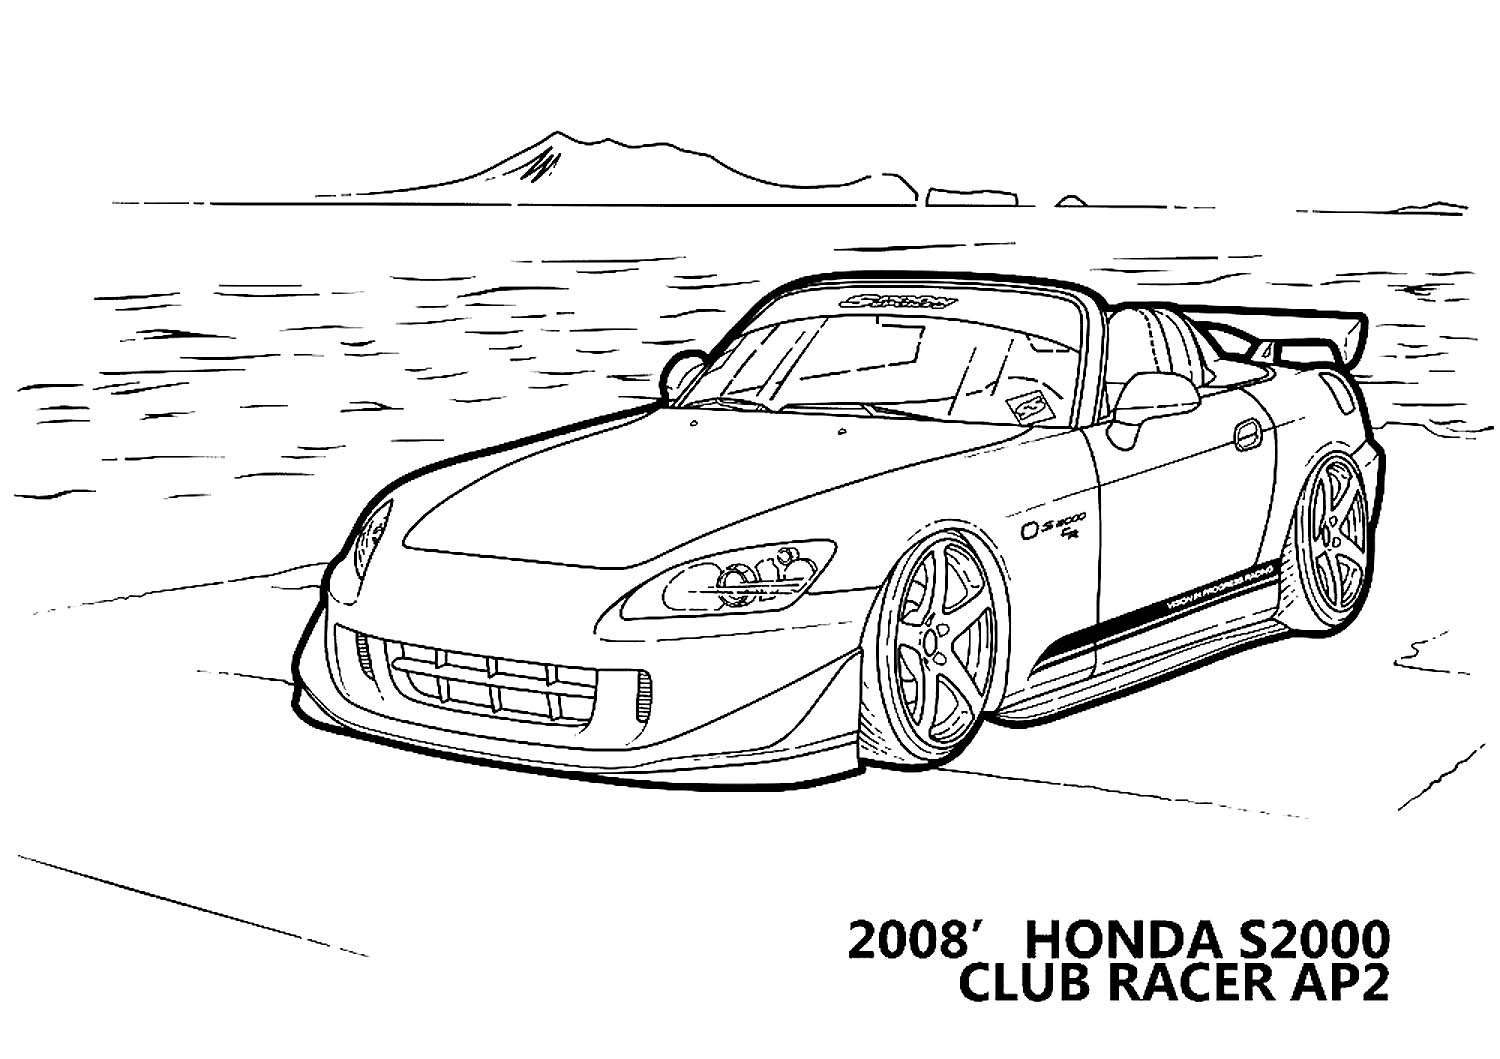 Honda Coloring Pages to download and print for free